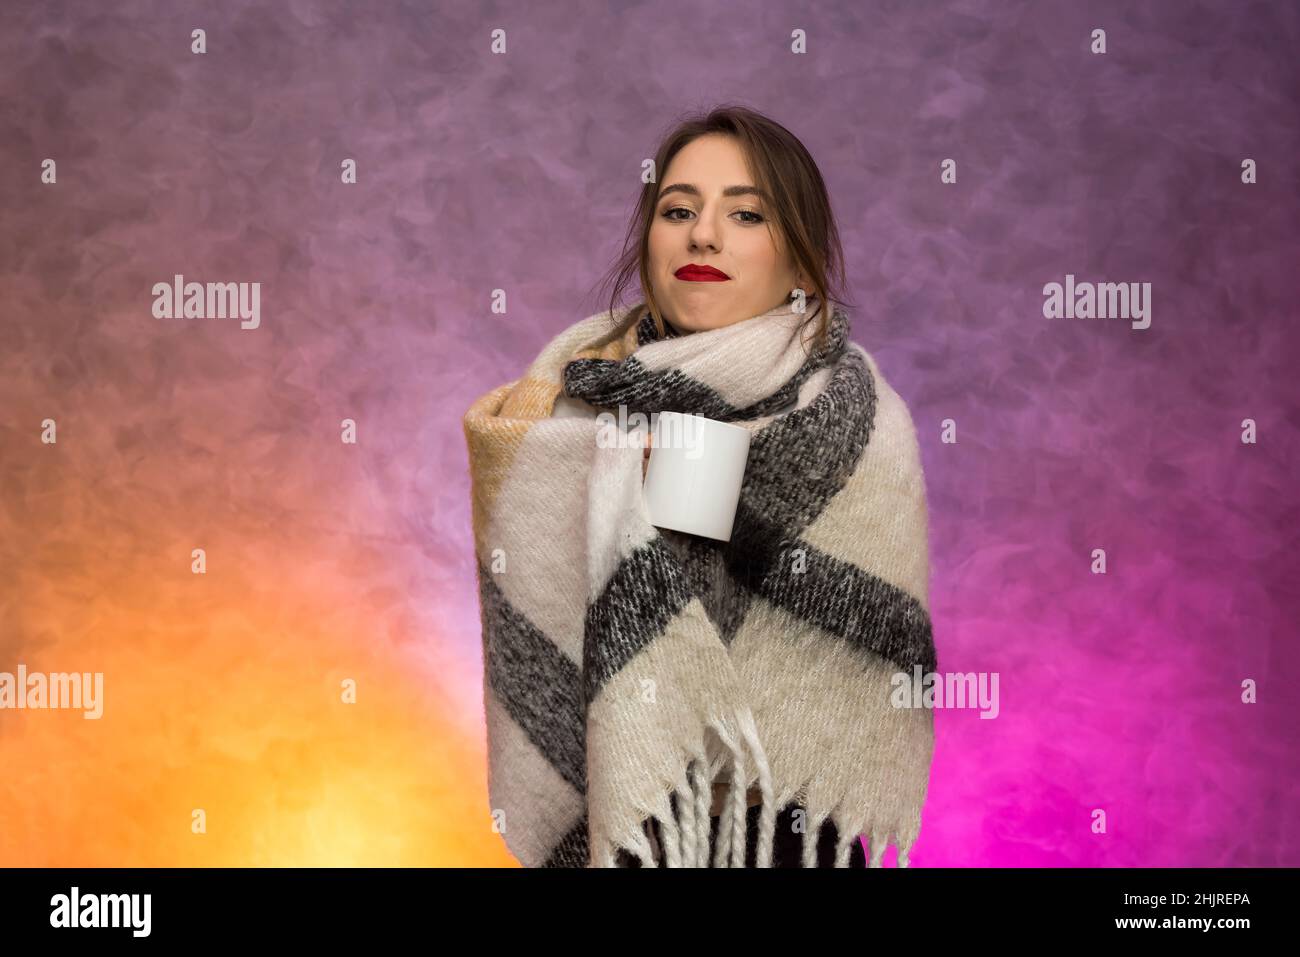 Sickness concept. Woman with warm blanket and hot tea cup posing with very sad emotions Stock Photo